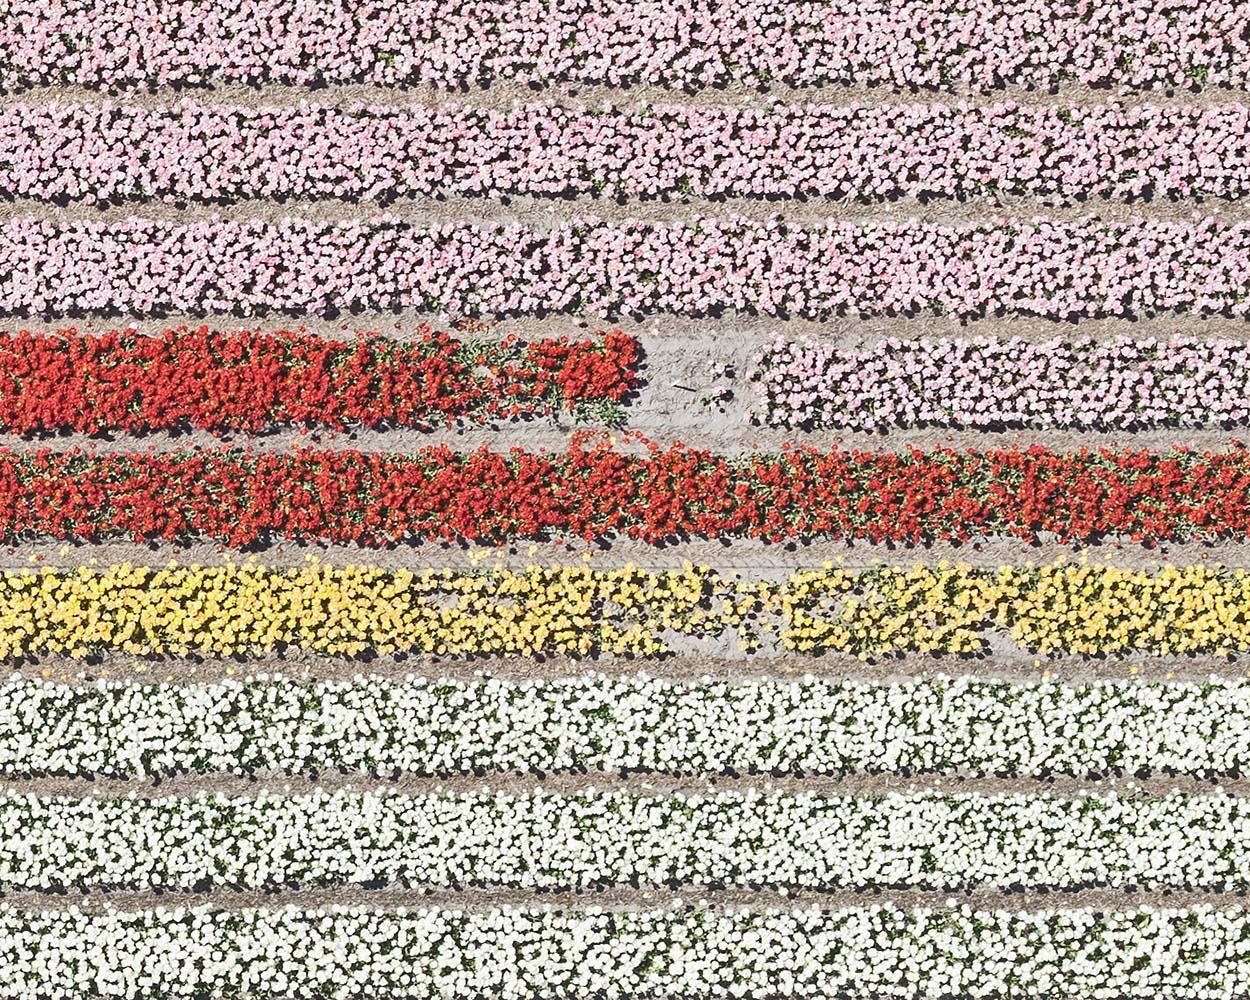 Tulip Fields 05 (Netherlands) by Bernhard Lang - Aerial abstract photography 3